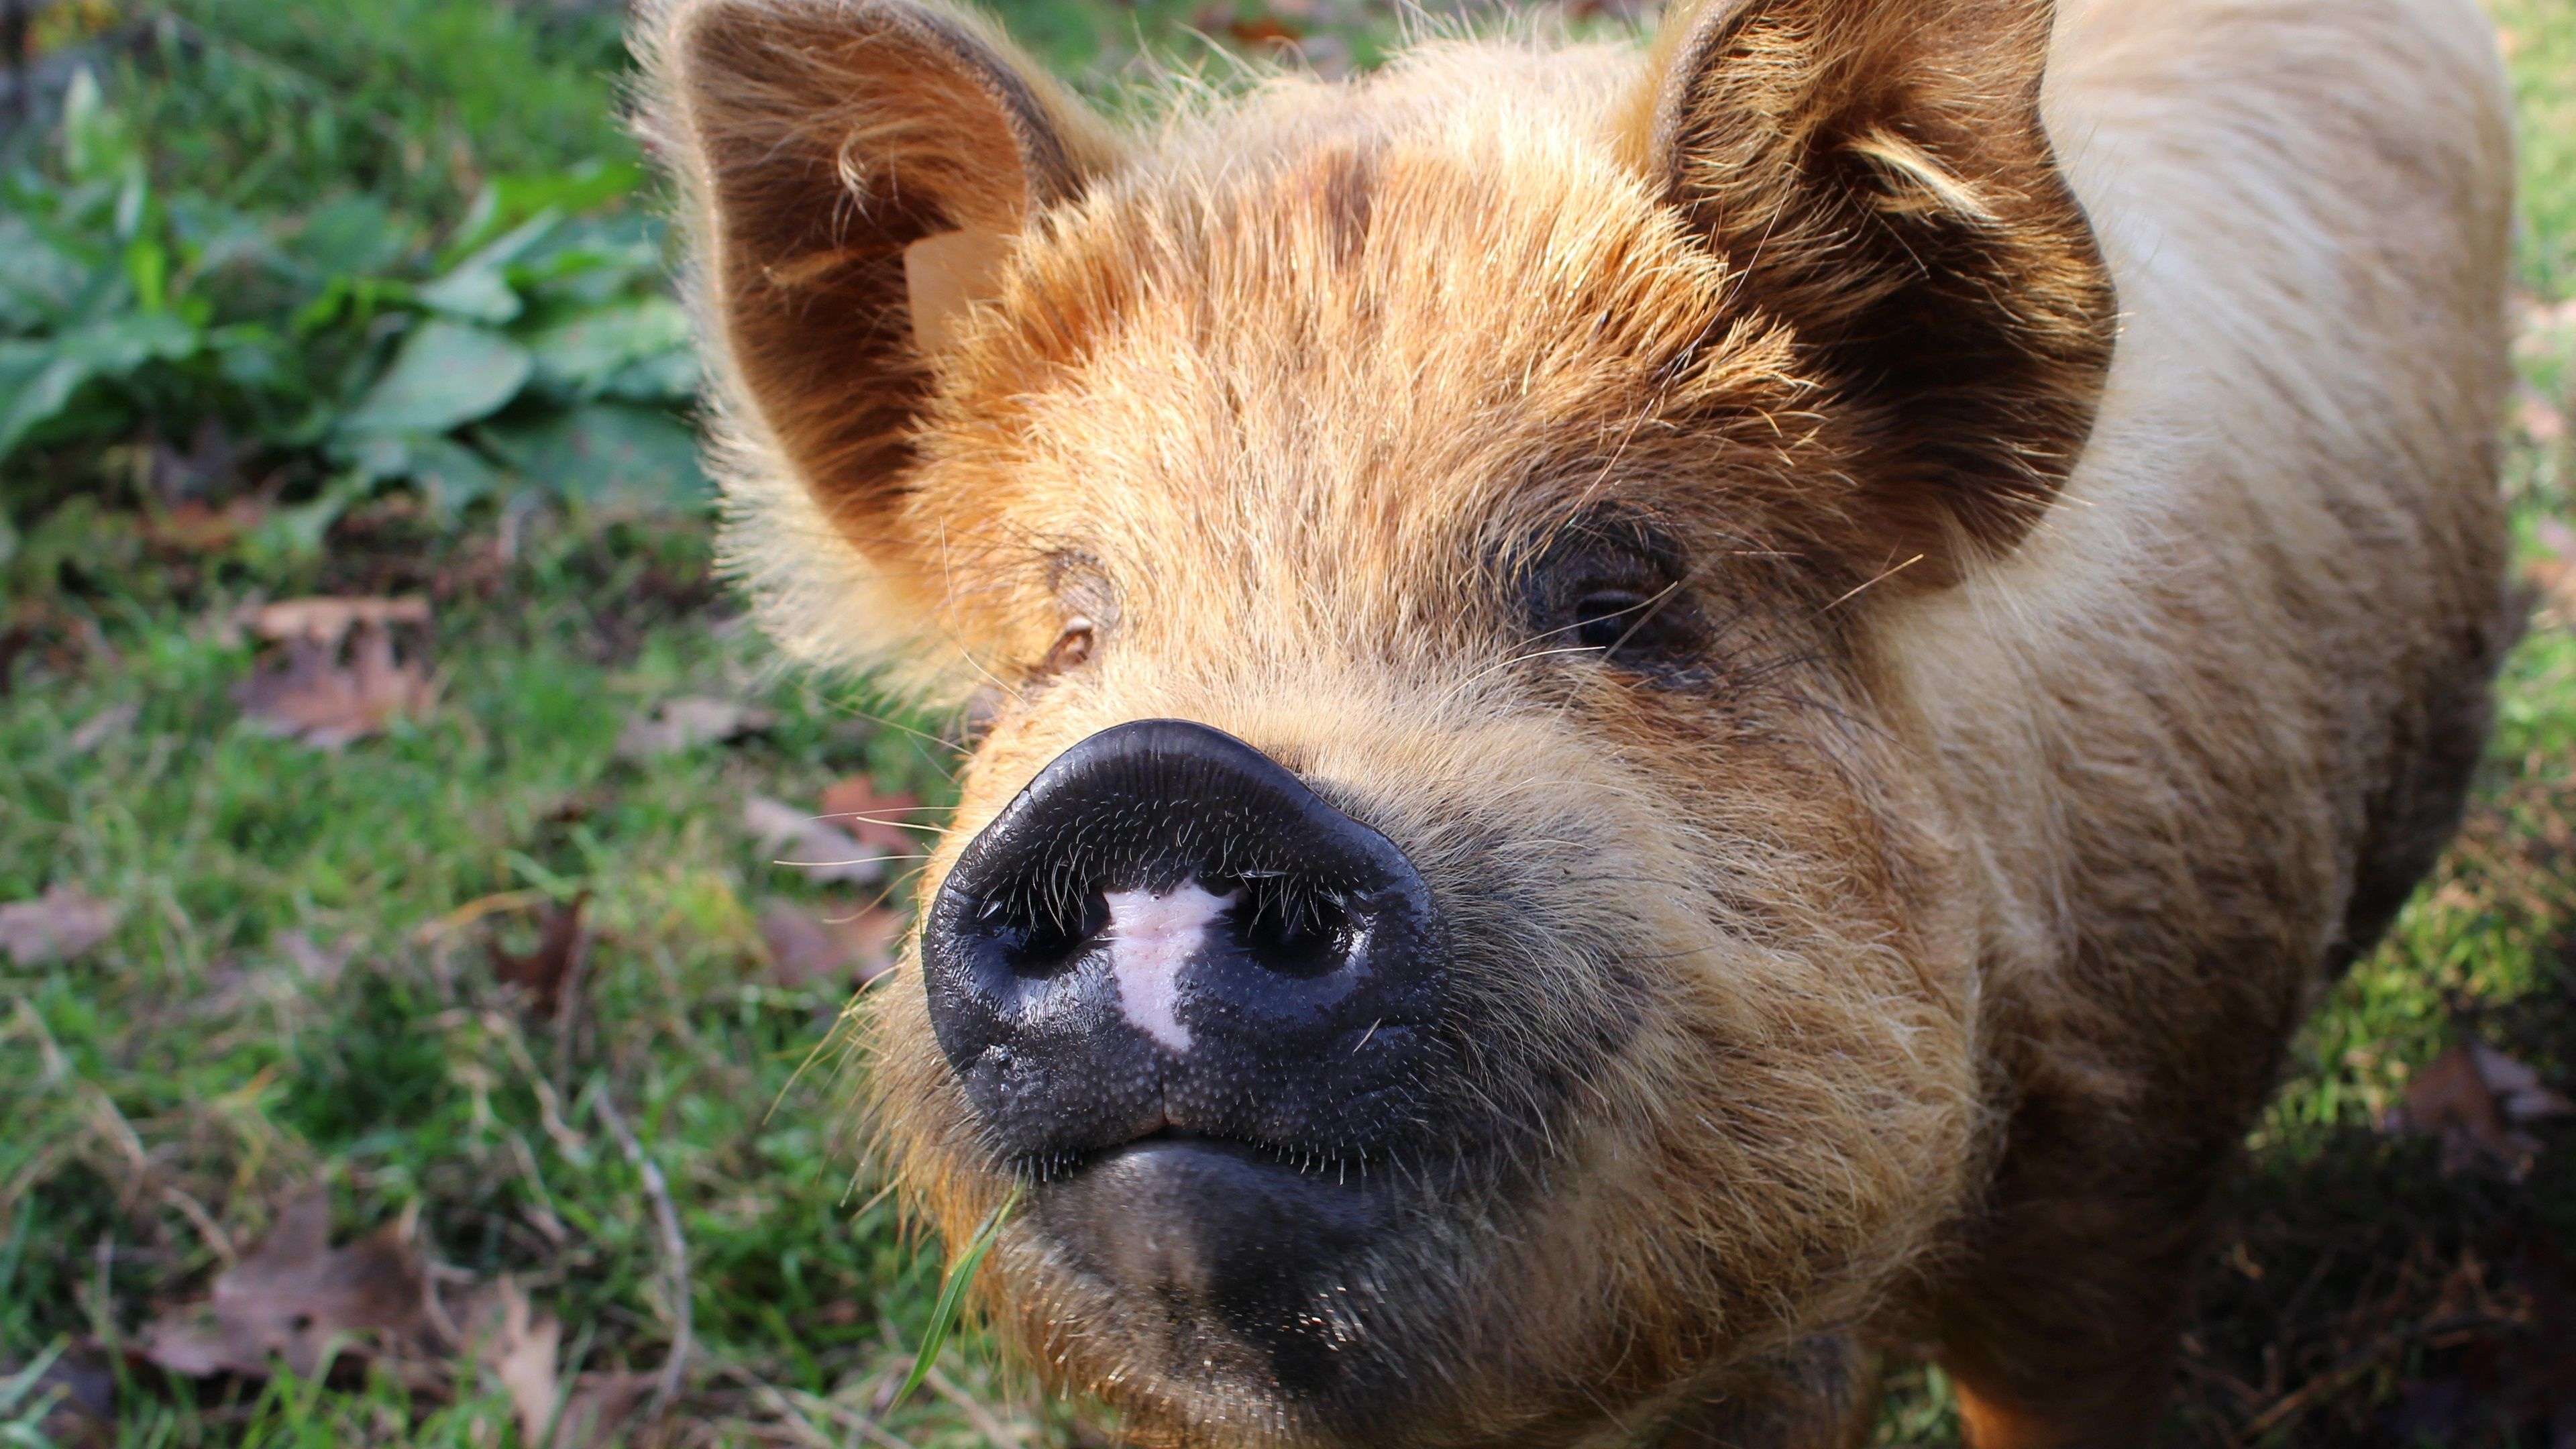 Cute pink snouts, Pig nose pictures, Adorable farm animals, Pig-themed wallpapers, 3840x2160 4K Desktop